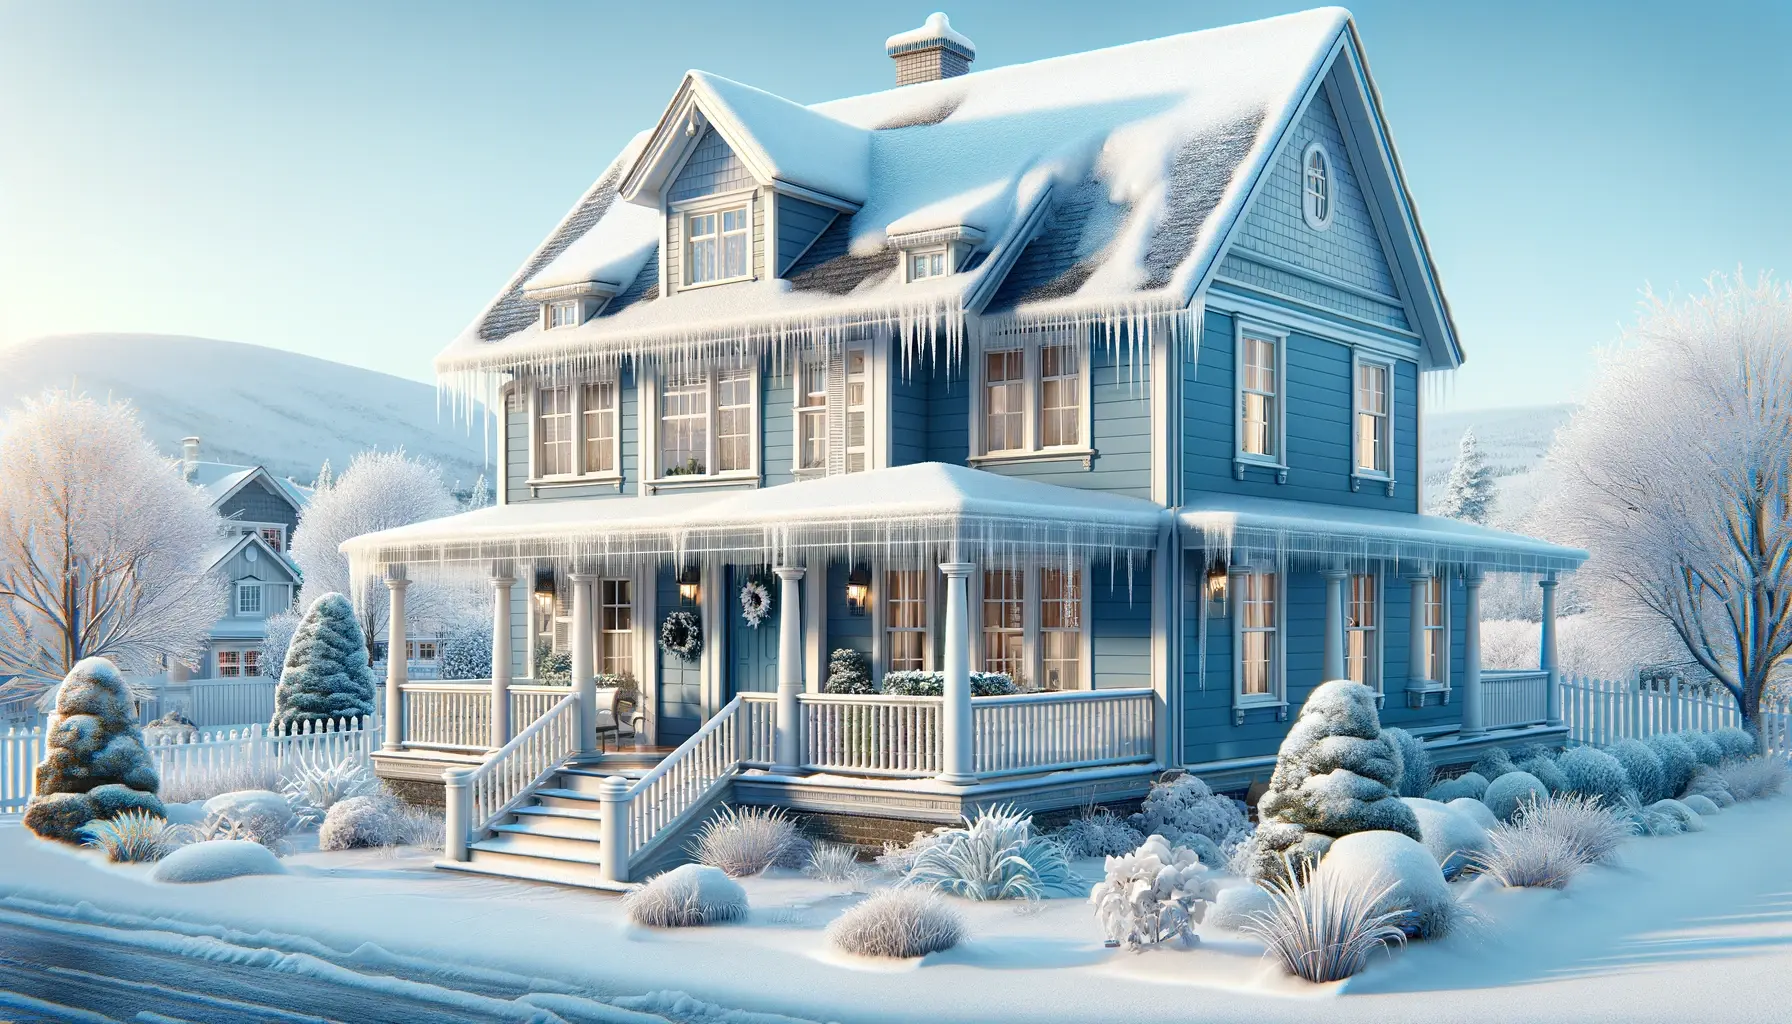 Vinyl Siding Benefits for Cold-Weather Homes